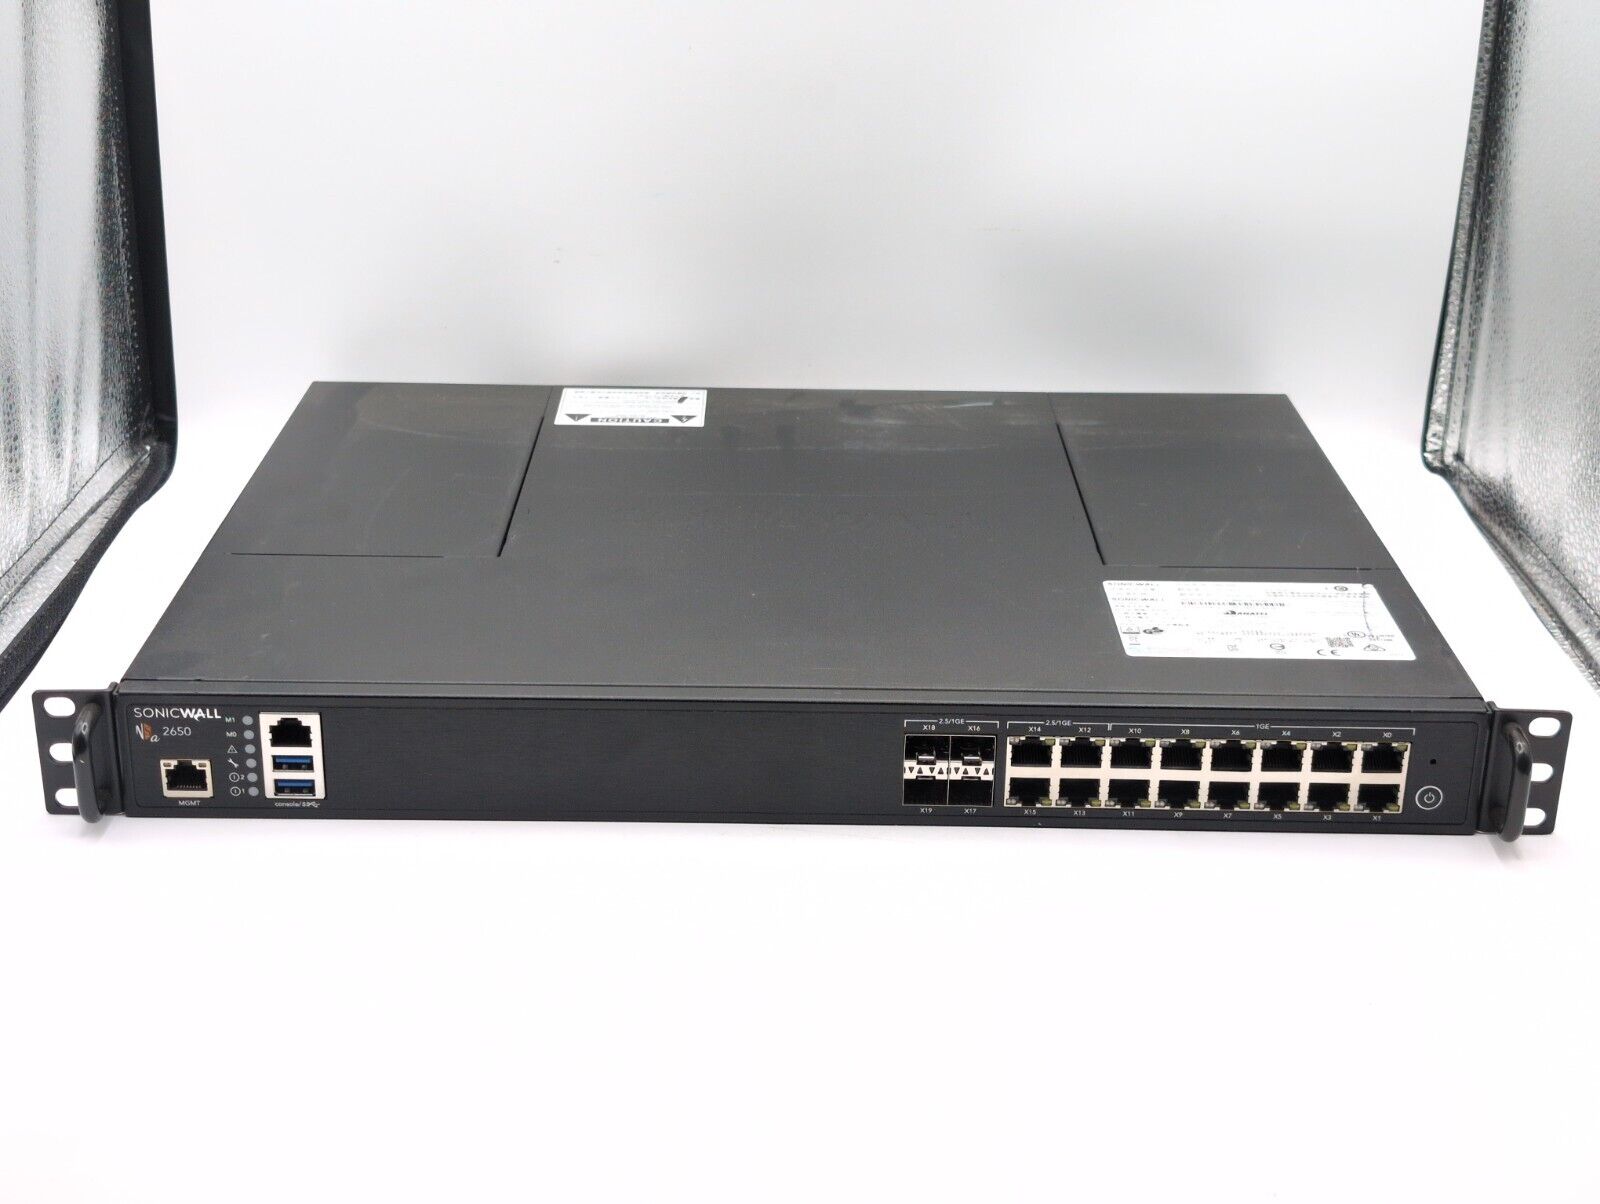 SonicWALL NSA 2650 Network Security/Firewall Appliance - Unknown License